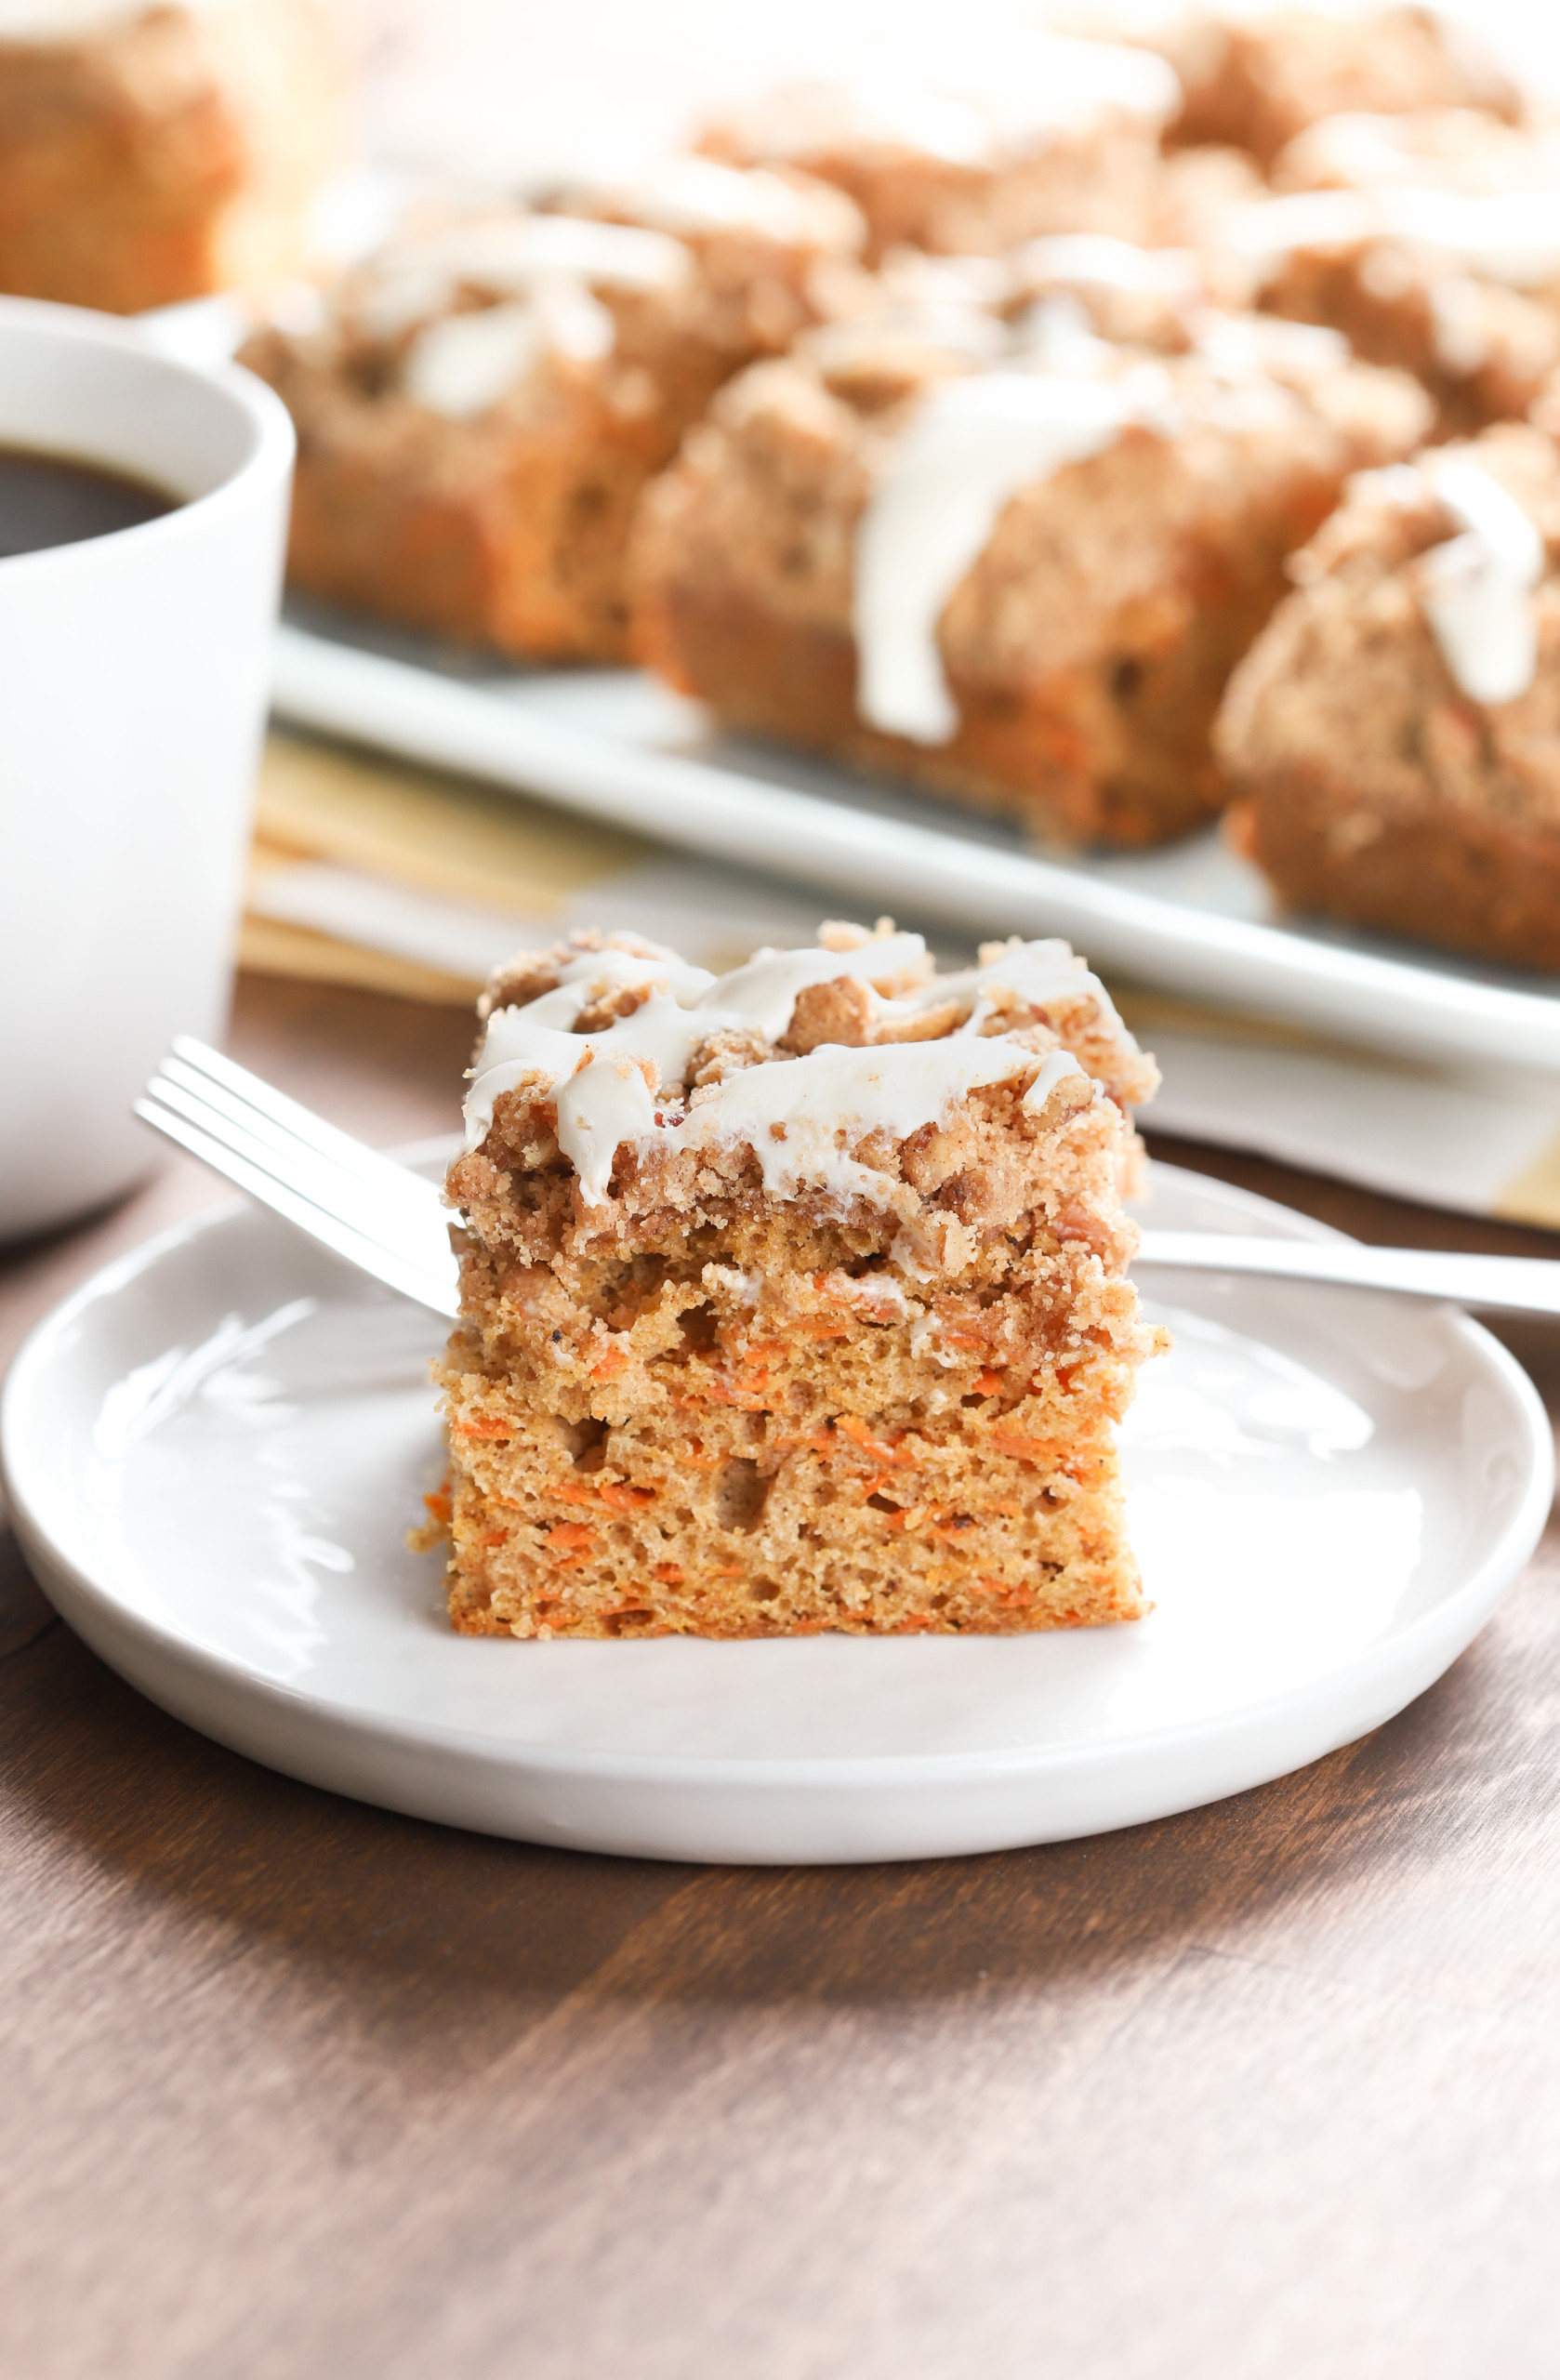 Up close side view of a piece of carrot coffee cake on a small white plate with the remaining cake on a blue plate in the background.